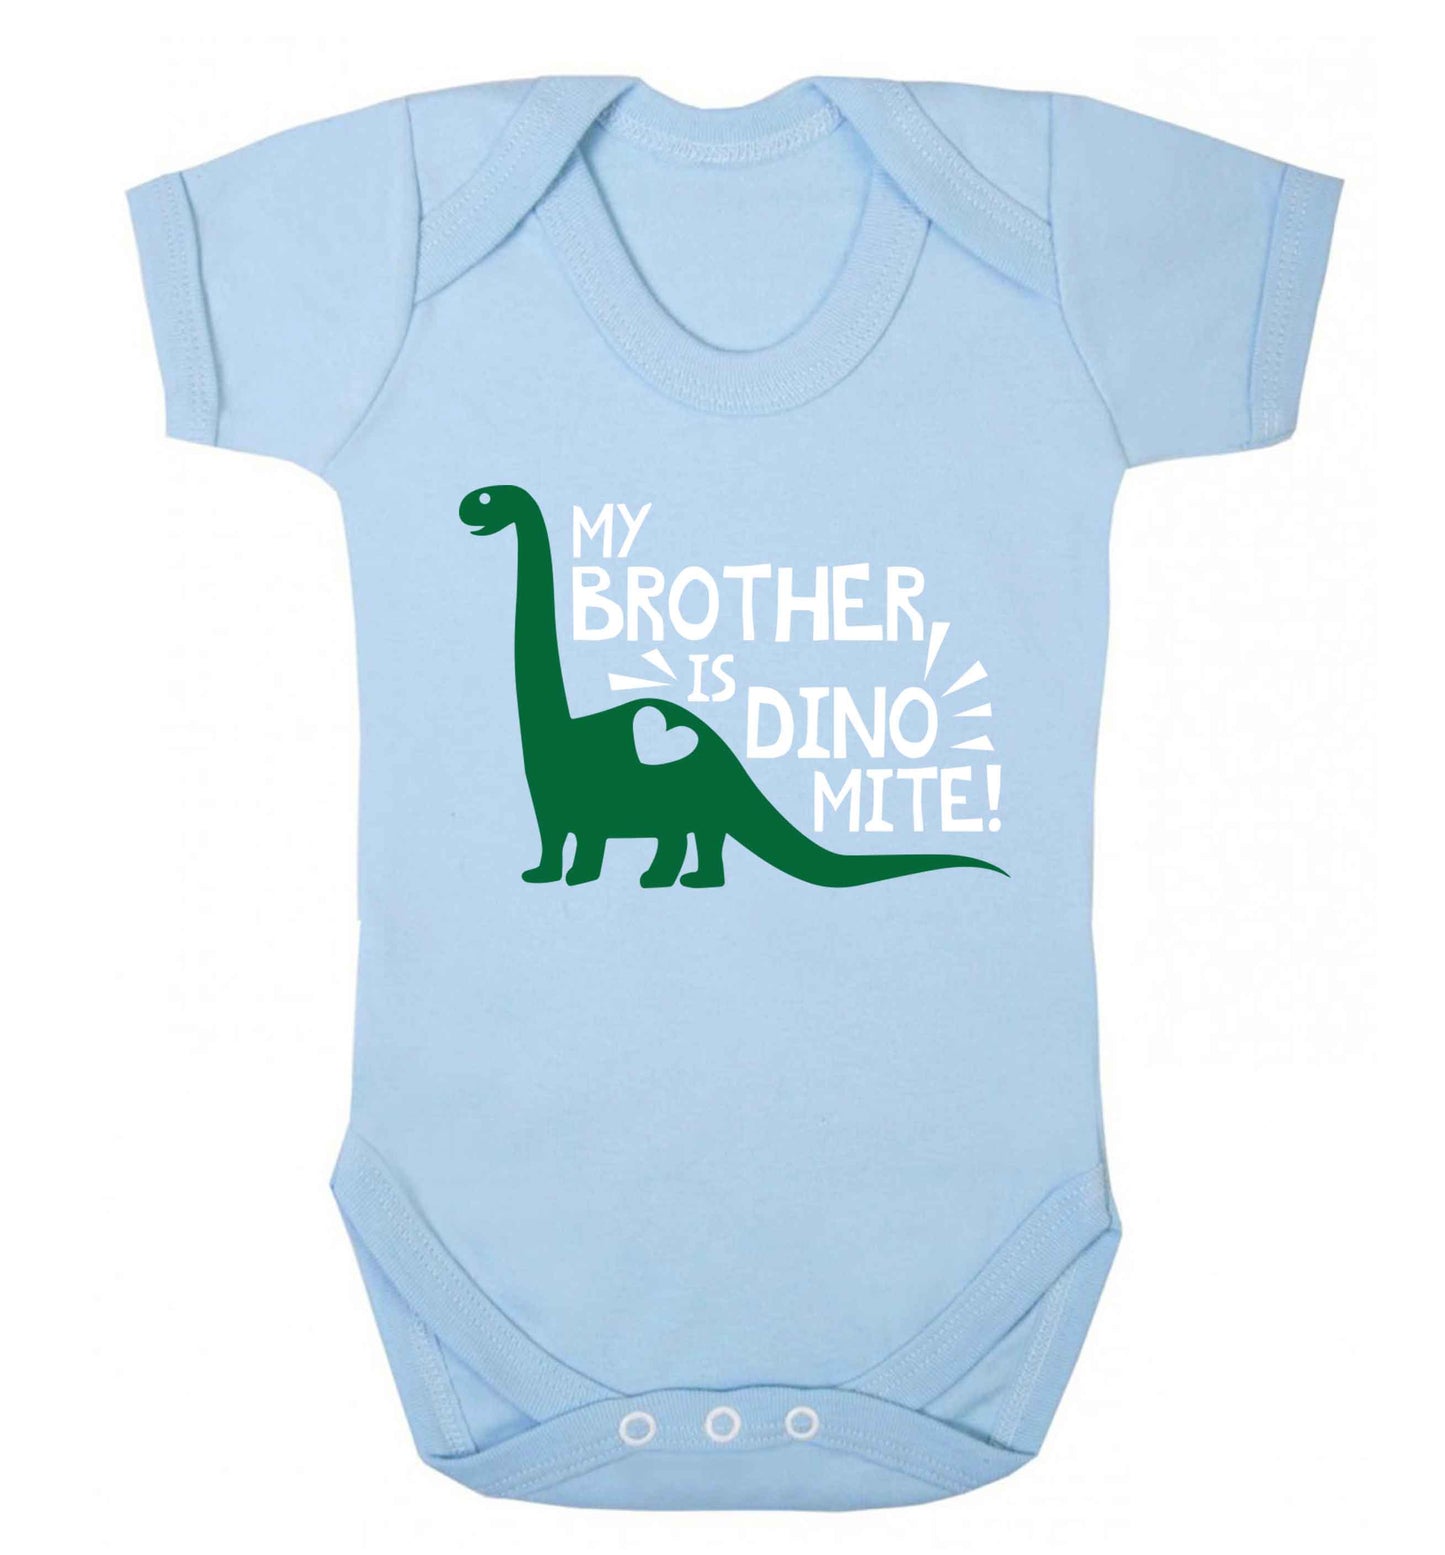 My brother is dinomite! Baby Vest pale blue 18-24 months